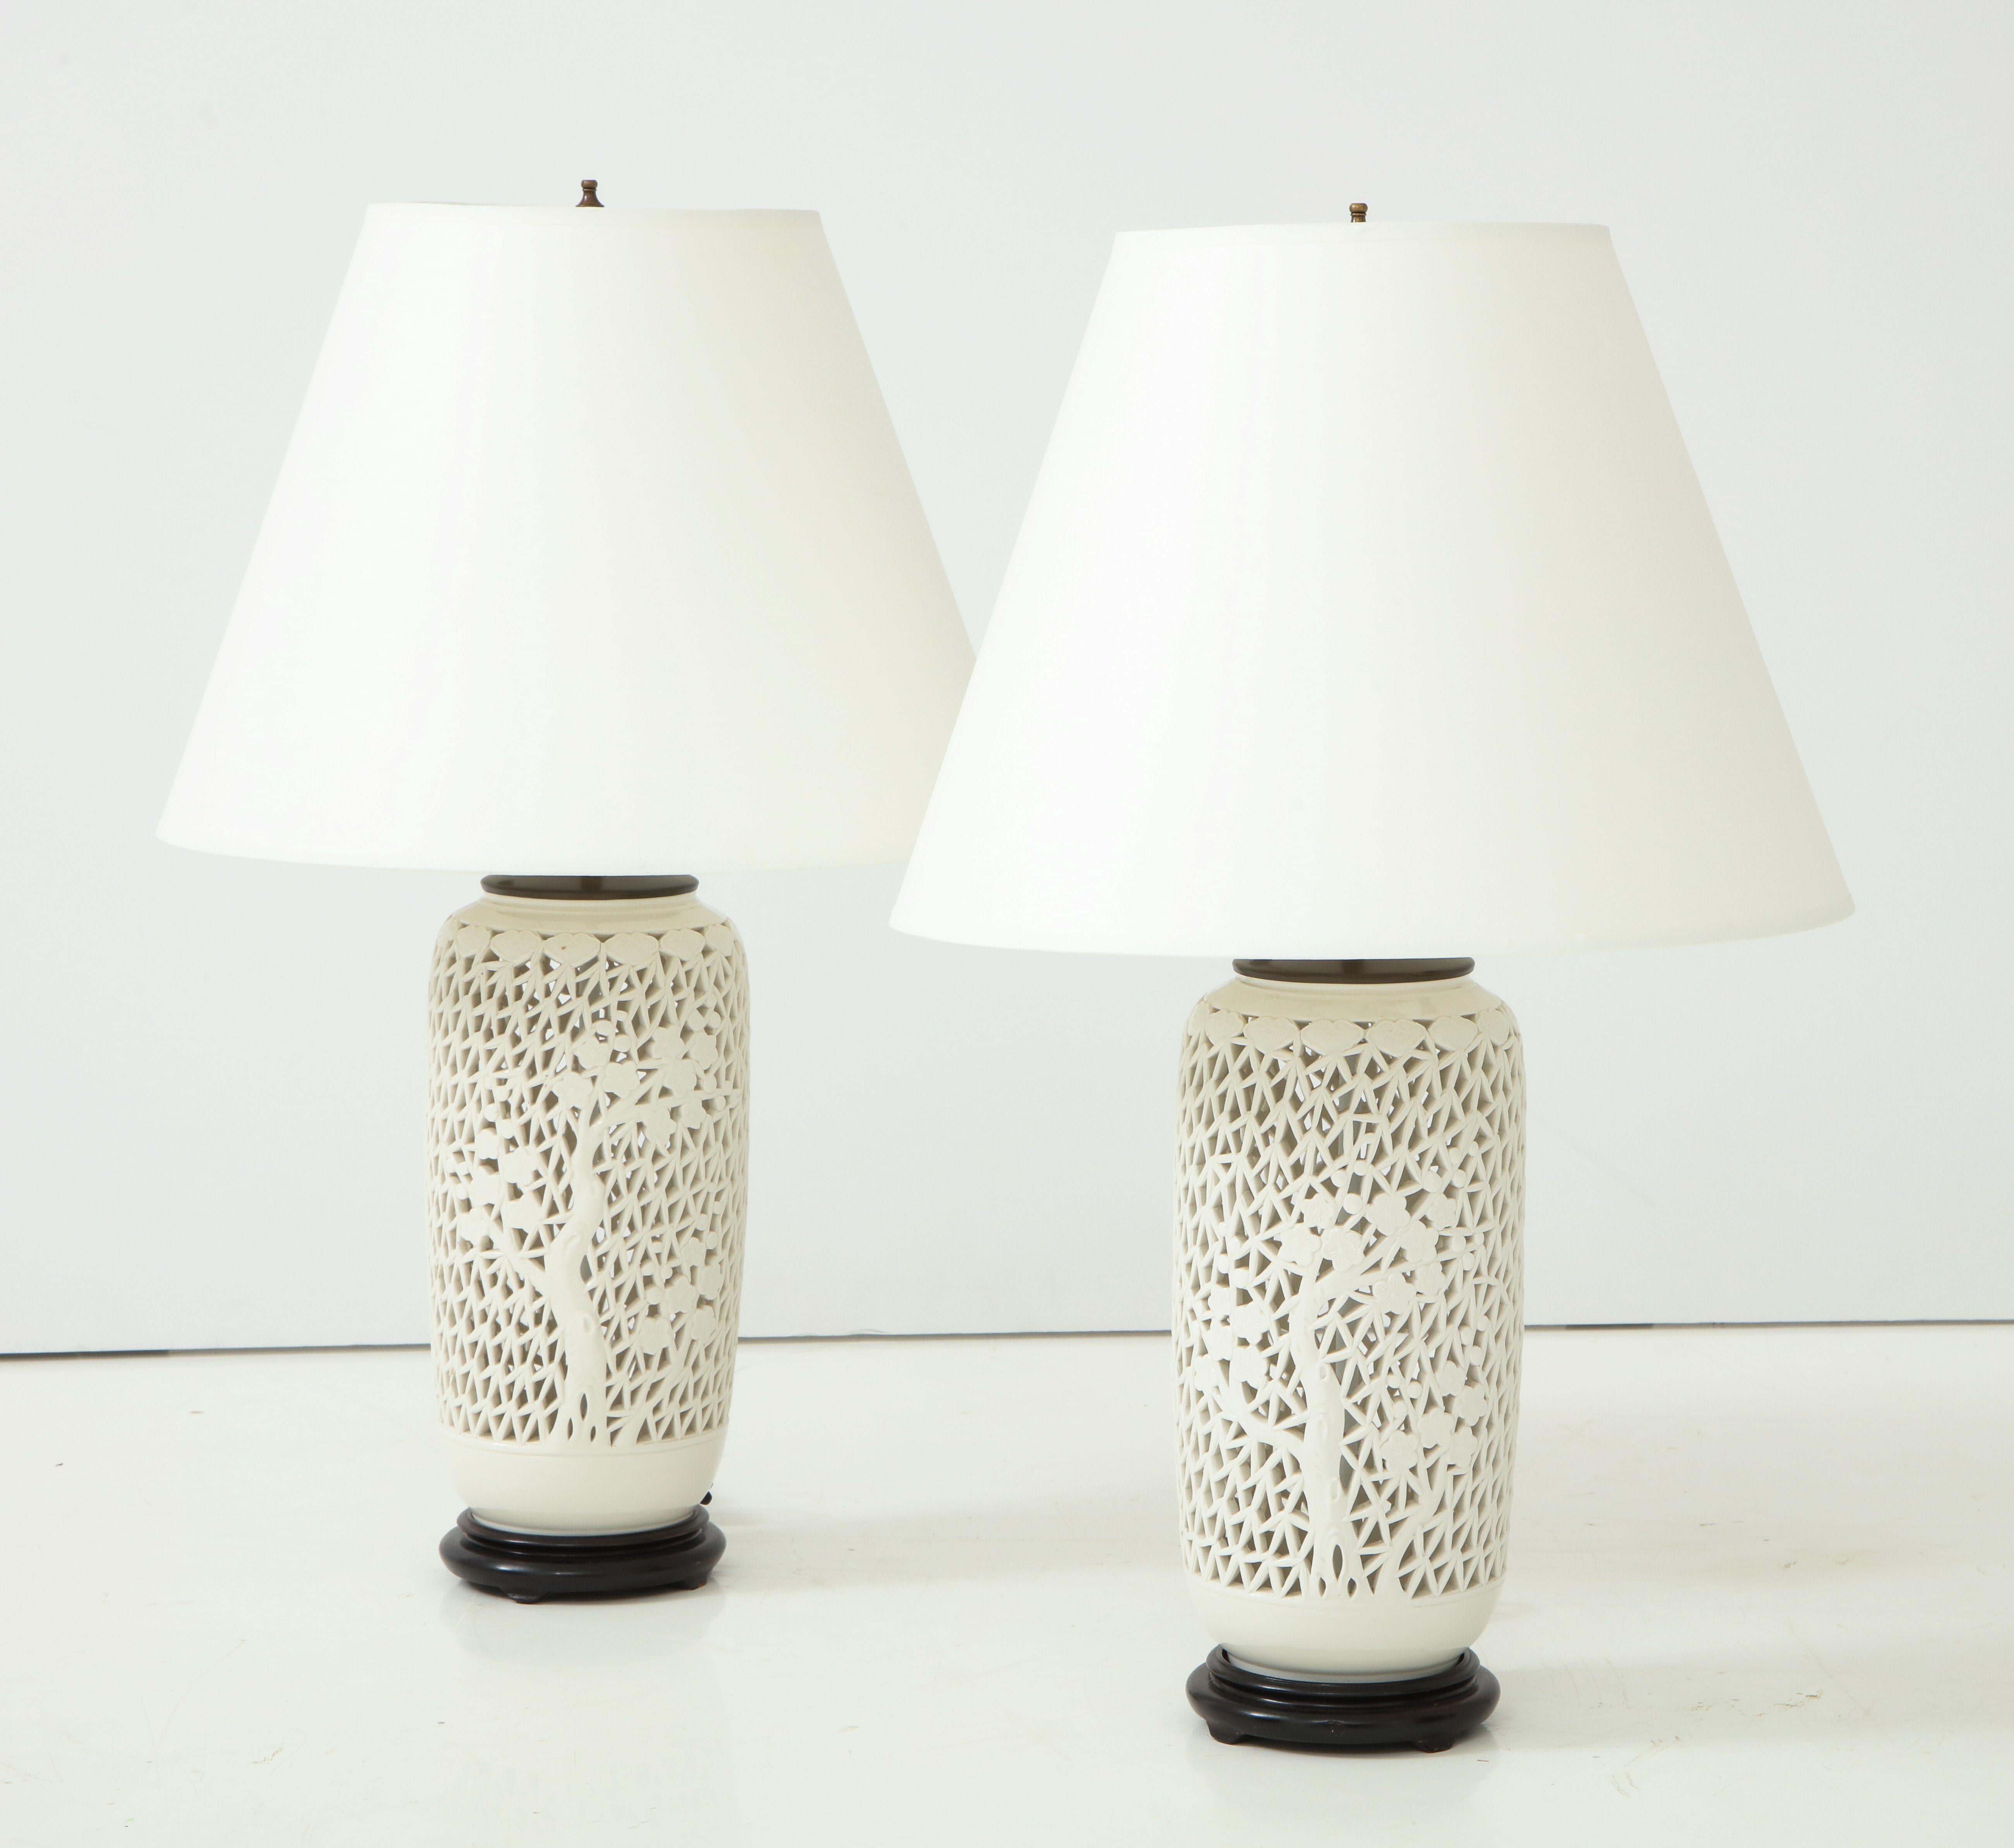 Pair of late 20th century reticulated white porcelain lamps on hardwood bases.
Chinese, circa 1960-1970.